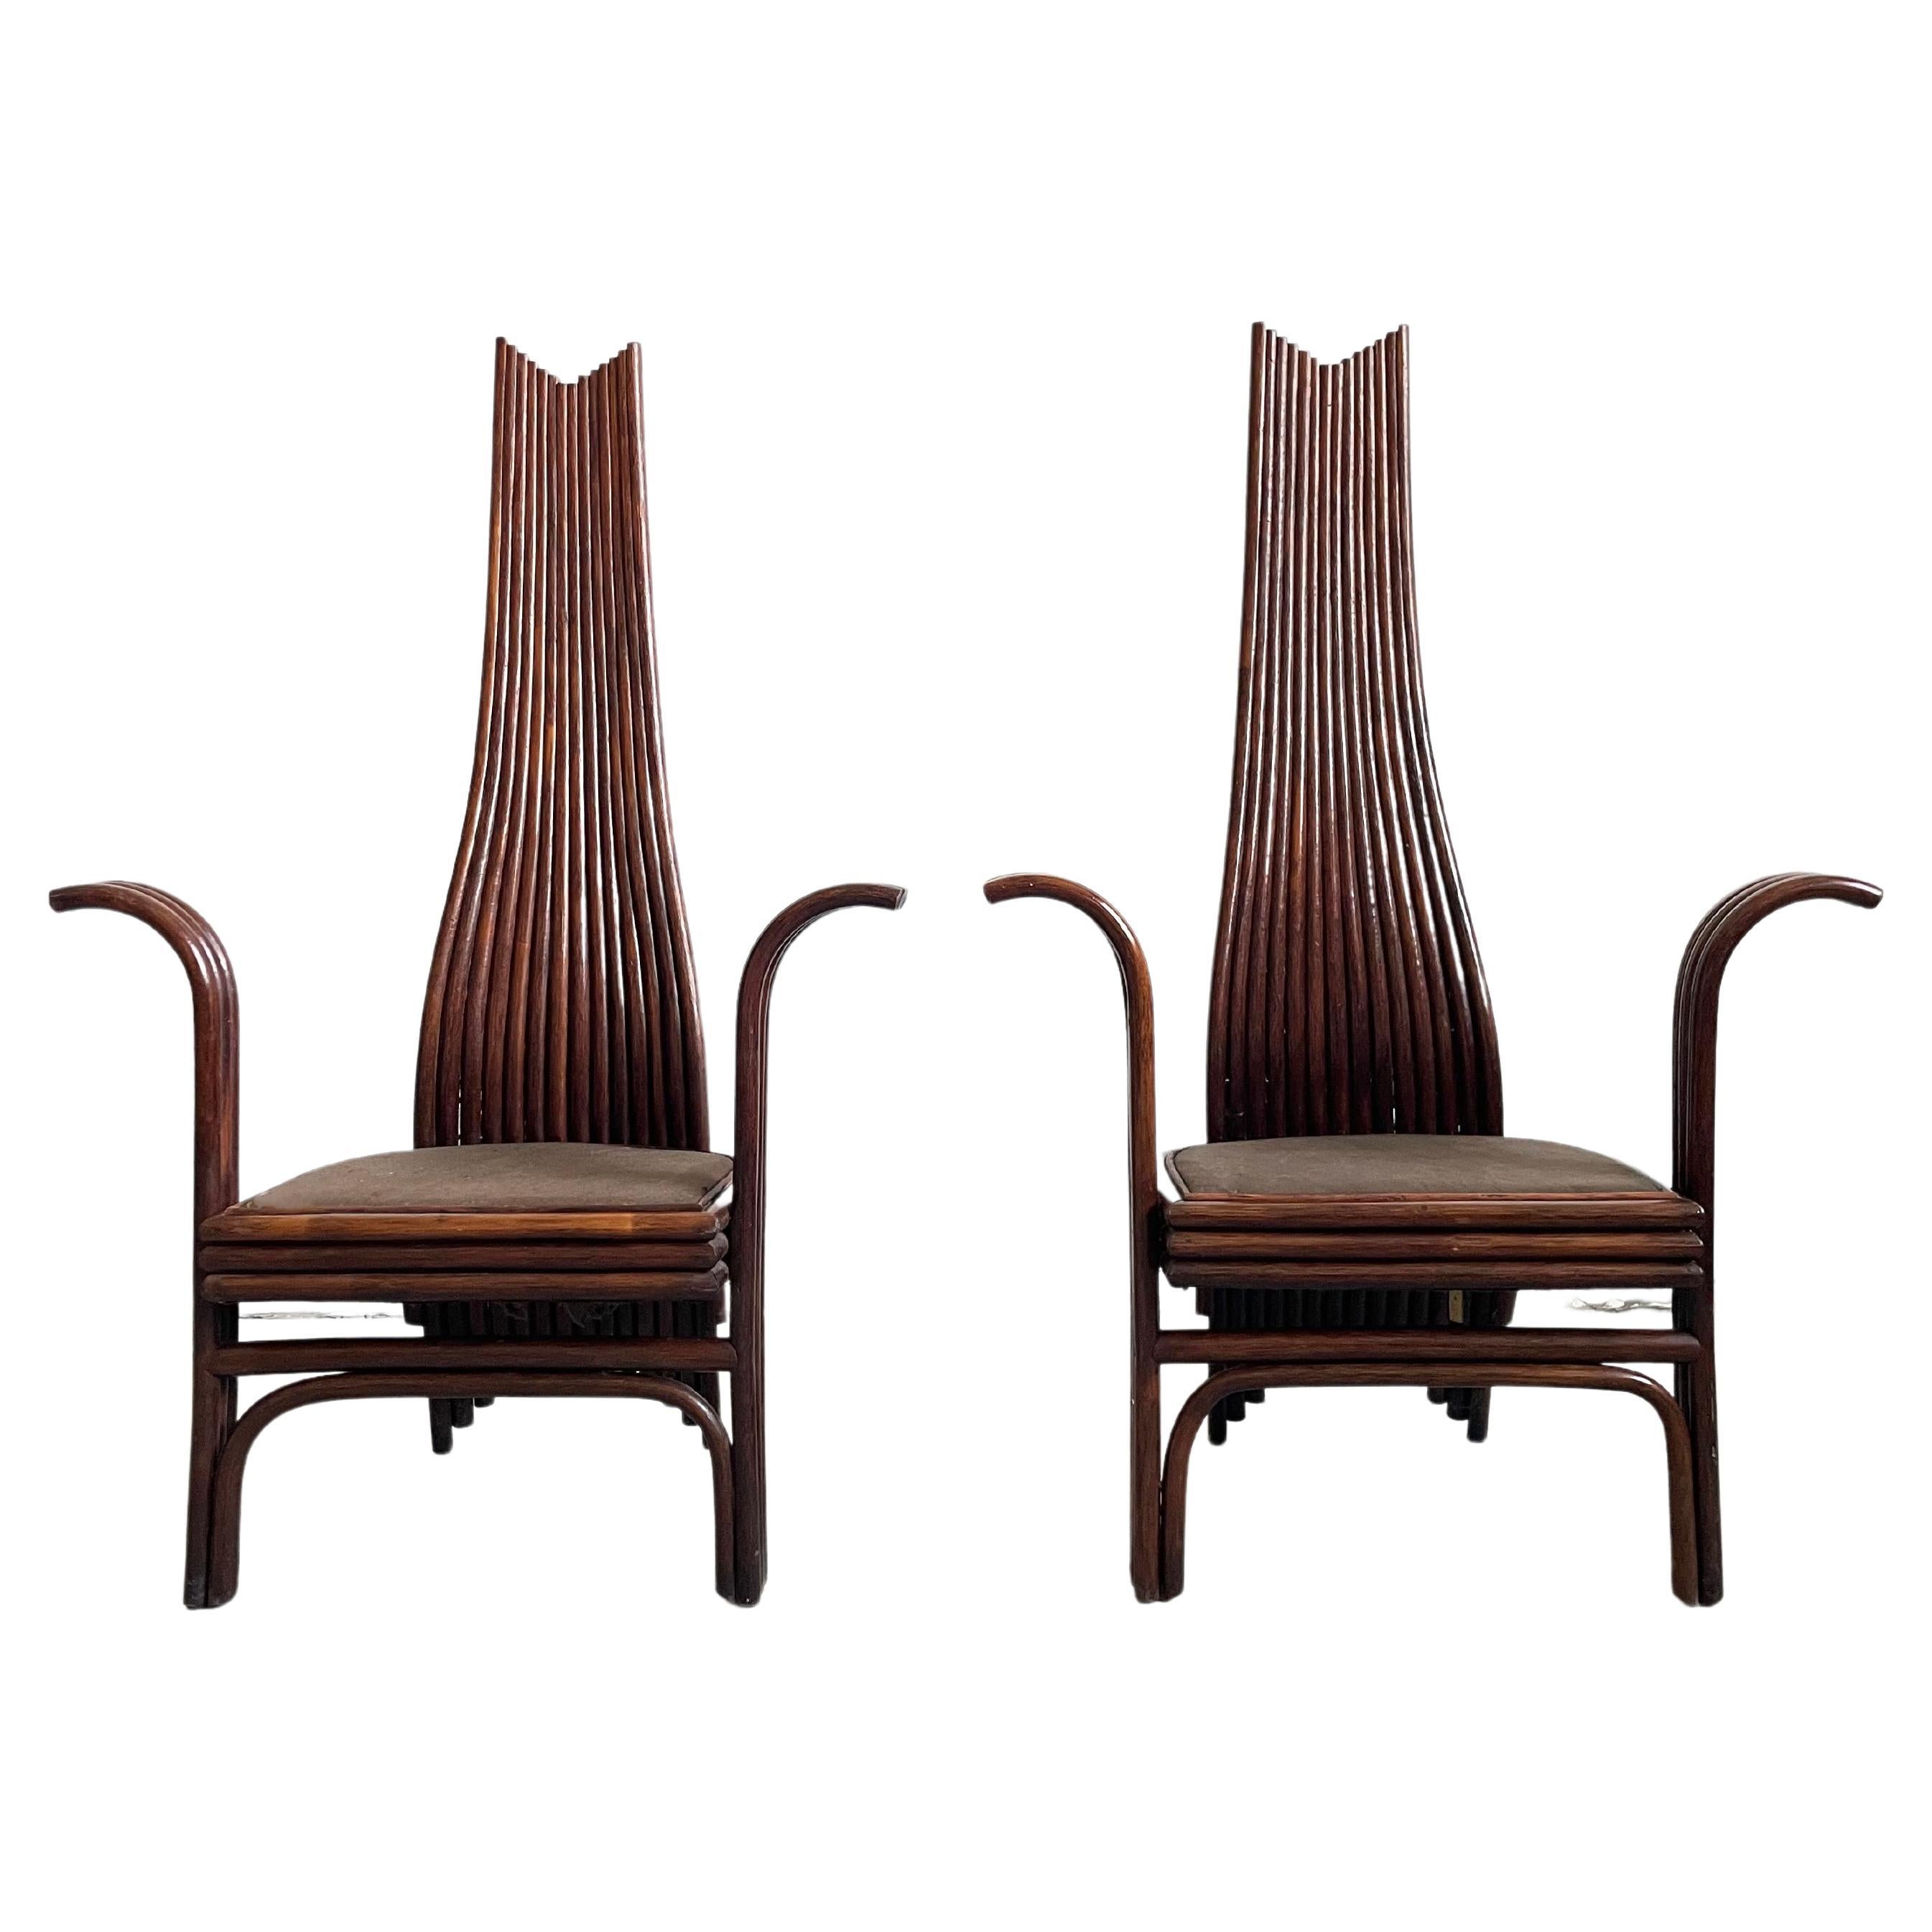 Set of 2 Bamboo High back Curved Dining Chairs with armrests, Mcguire USA 1970s